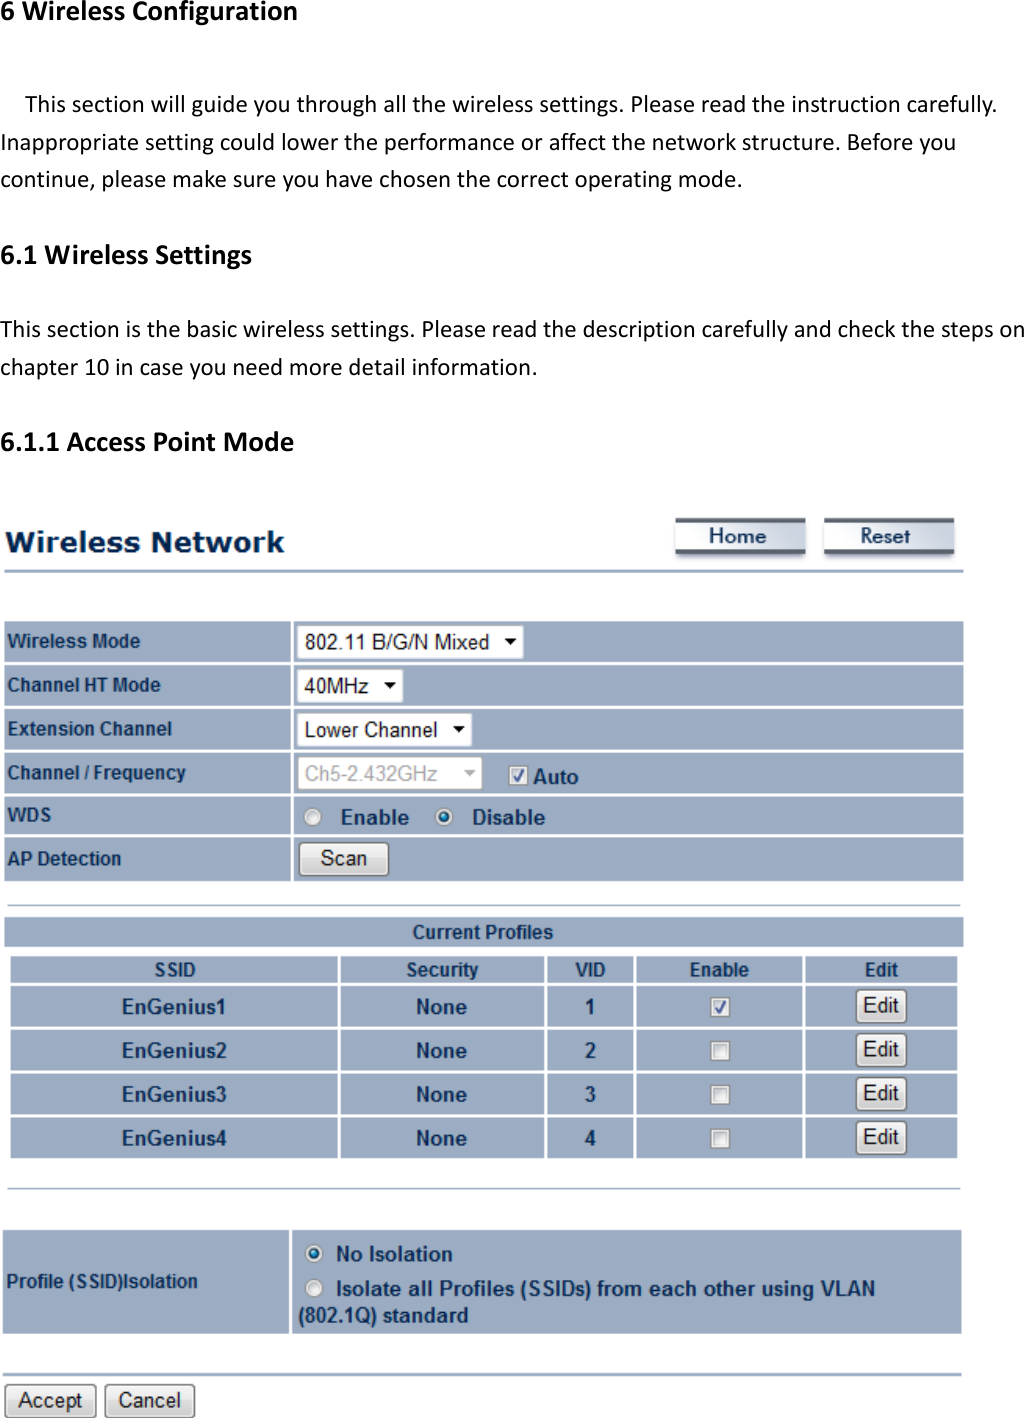 6 Wireless Configuration This section will guide you through all the wireless settings. Please read the instruction carefully. Inappropriate setting could lower the performance or affect the network structure. Before you continue, please make sure you have chosen the correct operating mode. 6.1 Wireless Settings This section is the basic wireless settings. Please read the description carefully and check the steps on chapter 10 in case you need more detail information. 6.1.1 Access Point Mode   